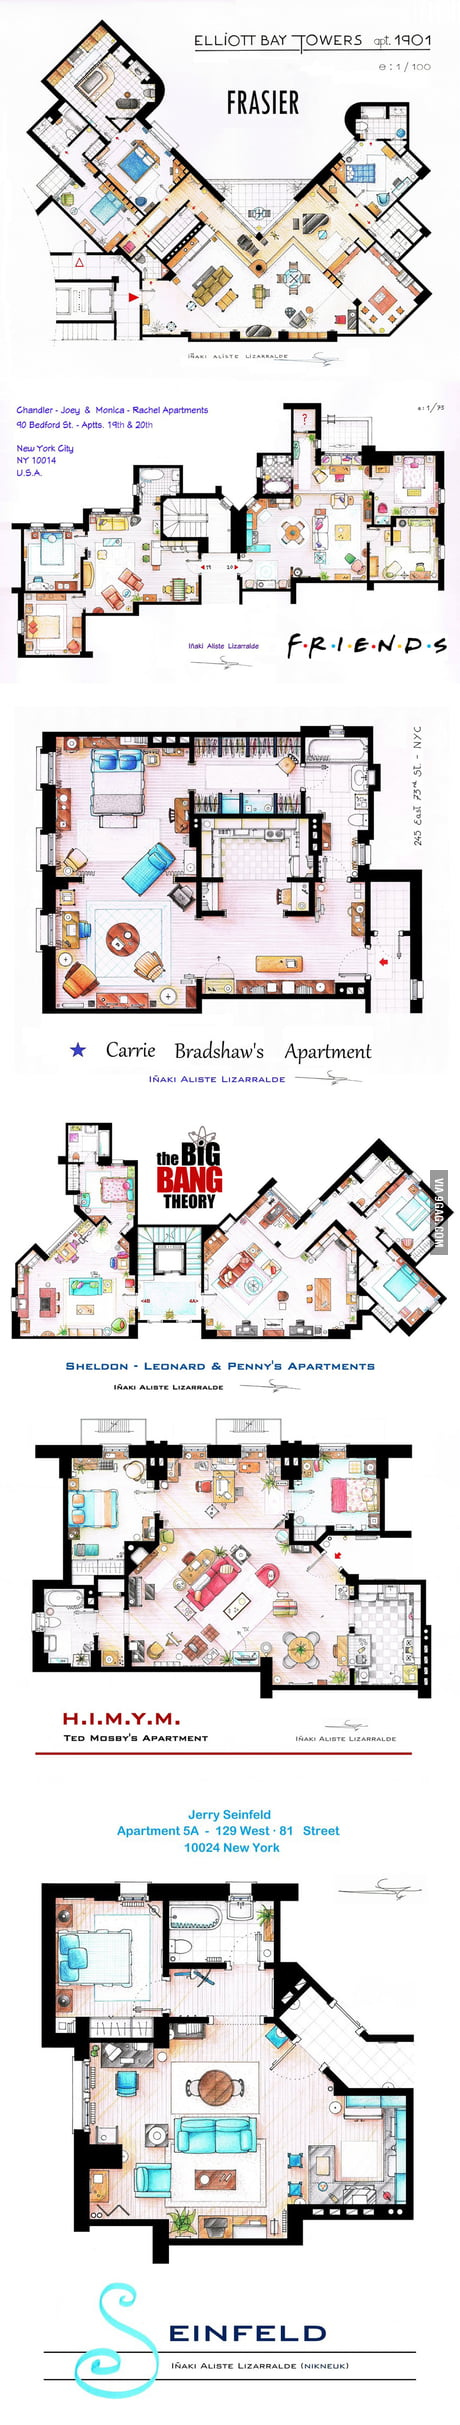 Floor Plans From Some Tv Series 9gag